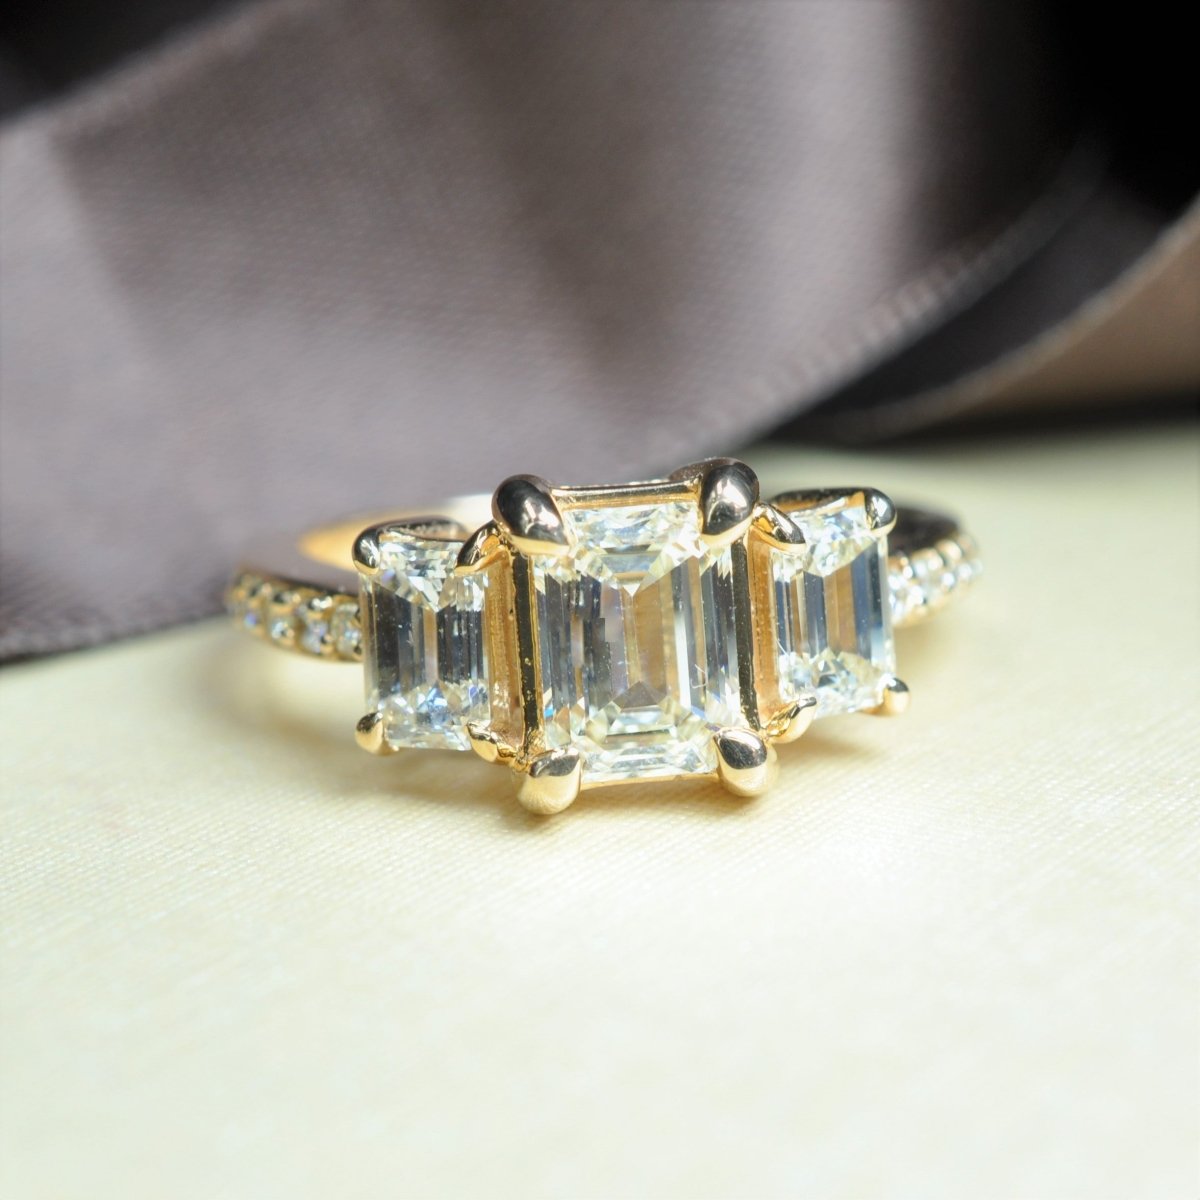 Rare 2.65 CT Emerald and Round Cut Diamond Engagement Ring in 14KT Yellow Gold - Primestyle.com